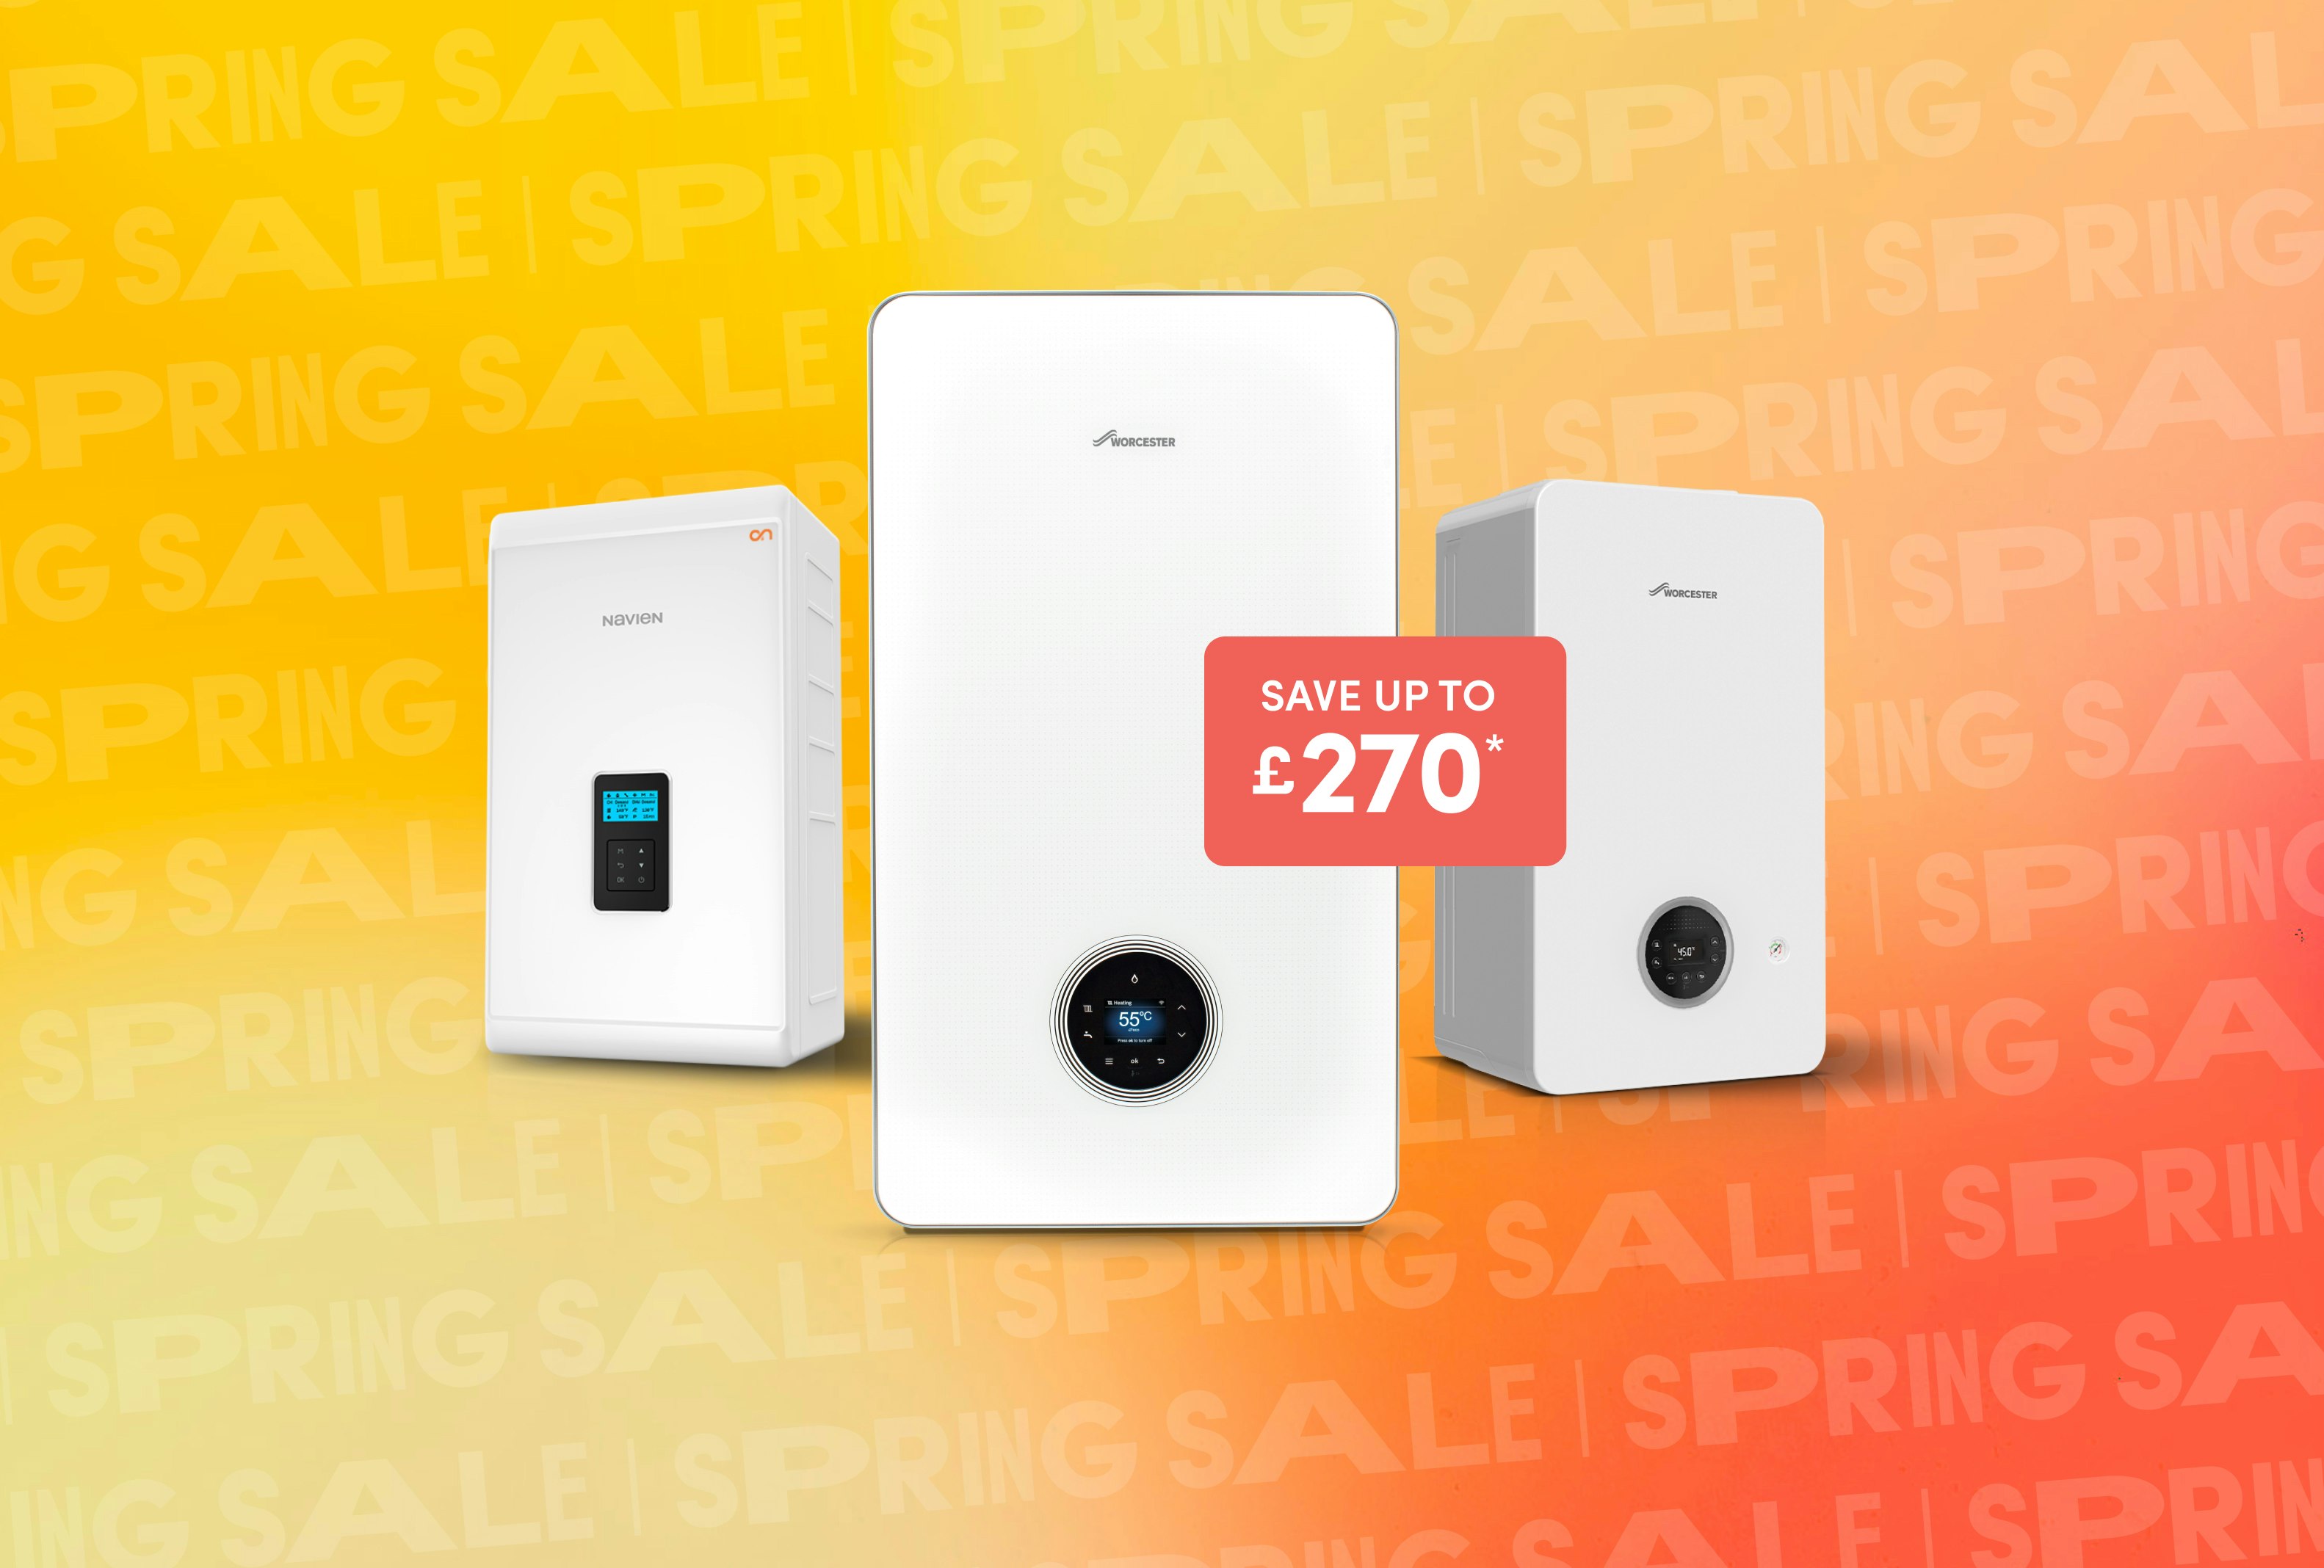 Three boilers stood in a row, a Navien, and two Worcester boilers with a red badge saying Save up to £270*. Set on a red & yellow background with the text Spring Sale repeated 